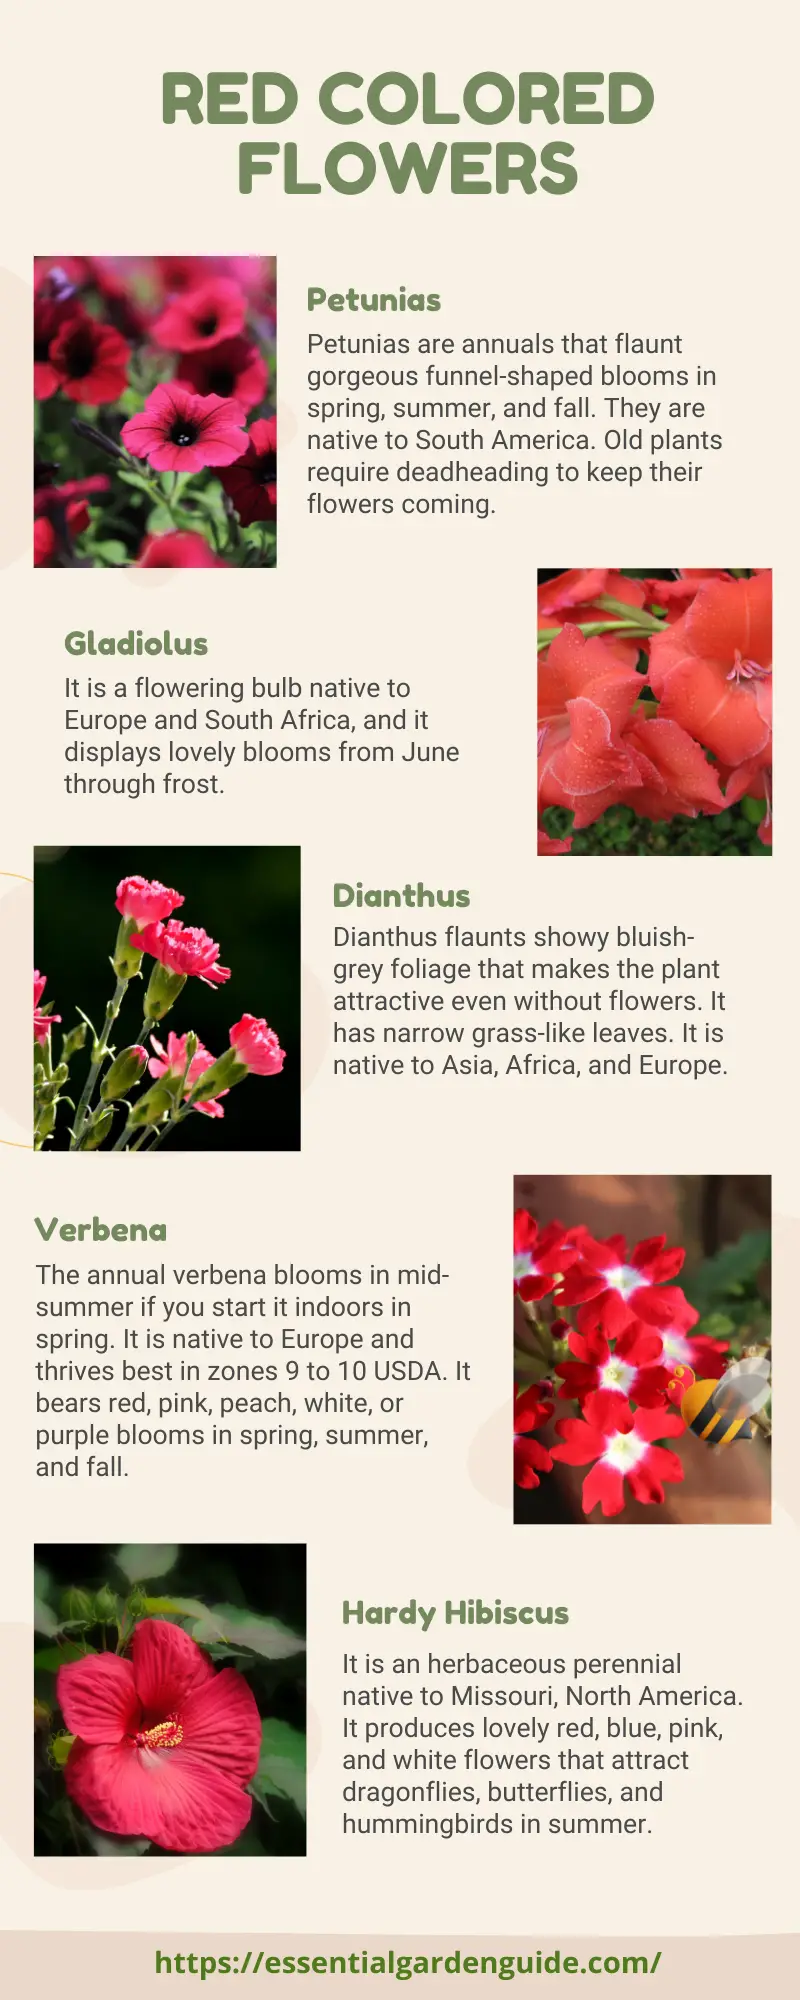 What are the most popular red flowers?